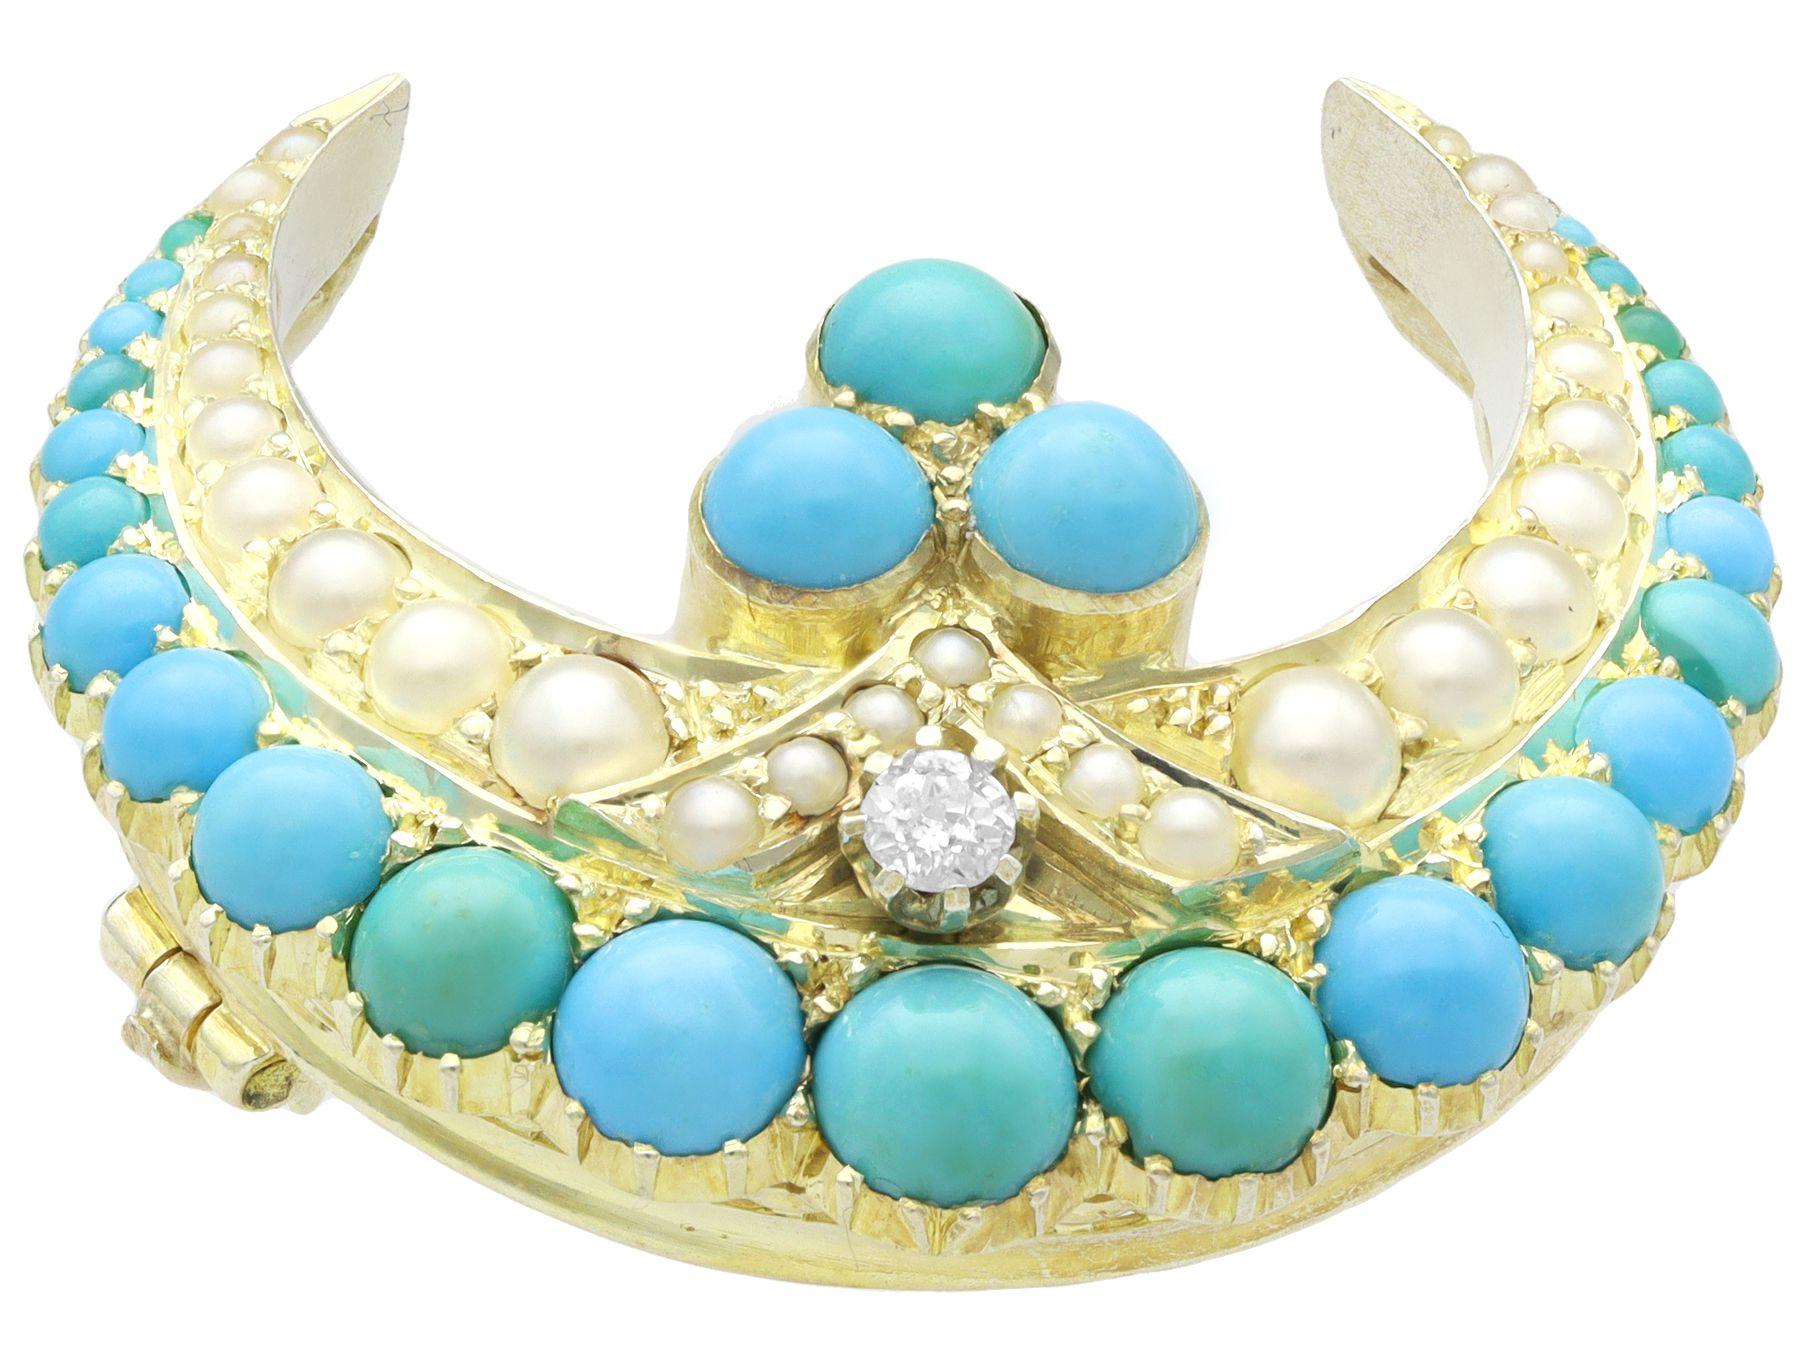 A stunning, fine and impressive Victorian 1.10 carat diamond, 1.90 carat turquoise, pearl, 9 karat yellow gold and silver set brooch; part our antique jewelry/estate jewelry collections.

This stunning, fine and impressive antique turquoise brooch